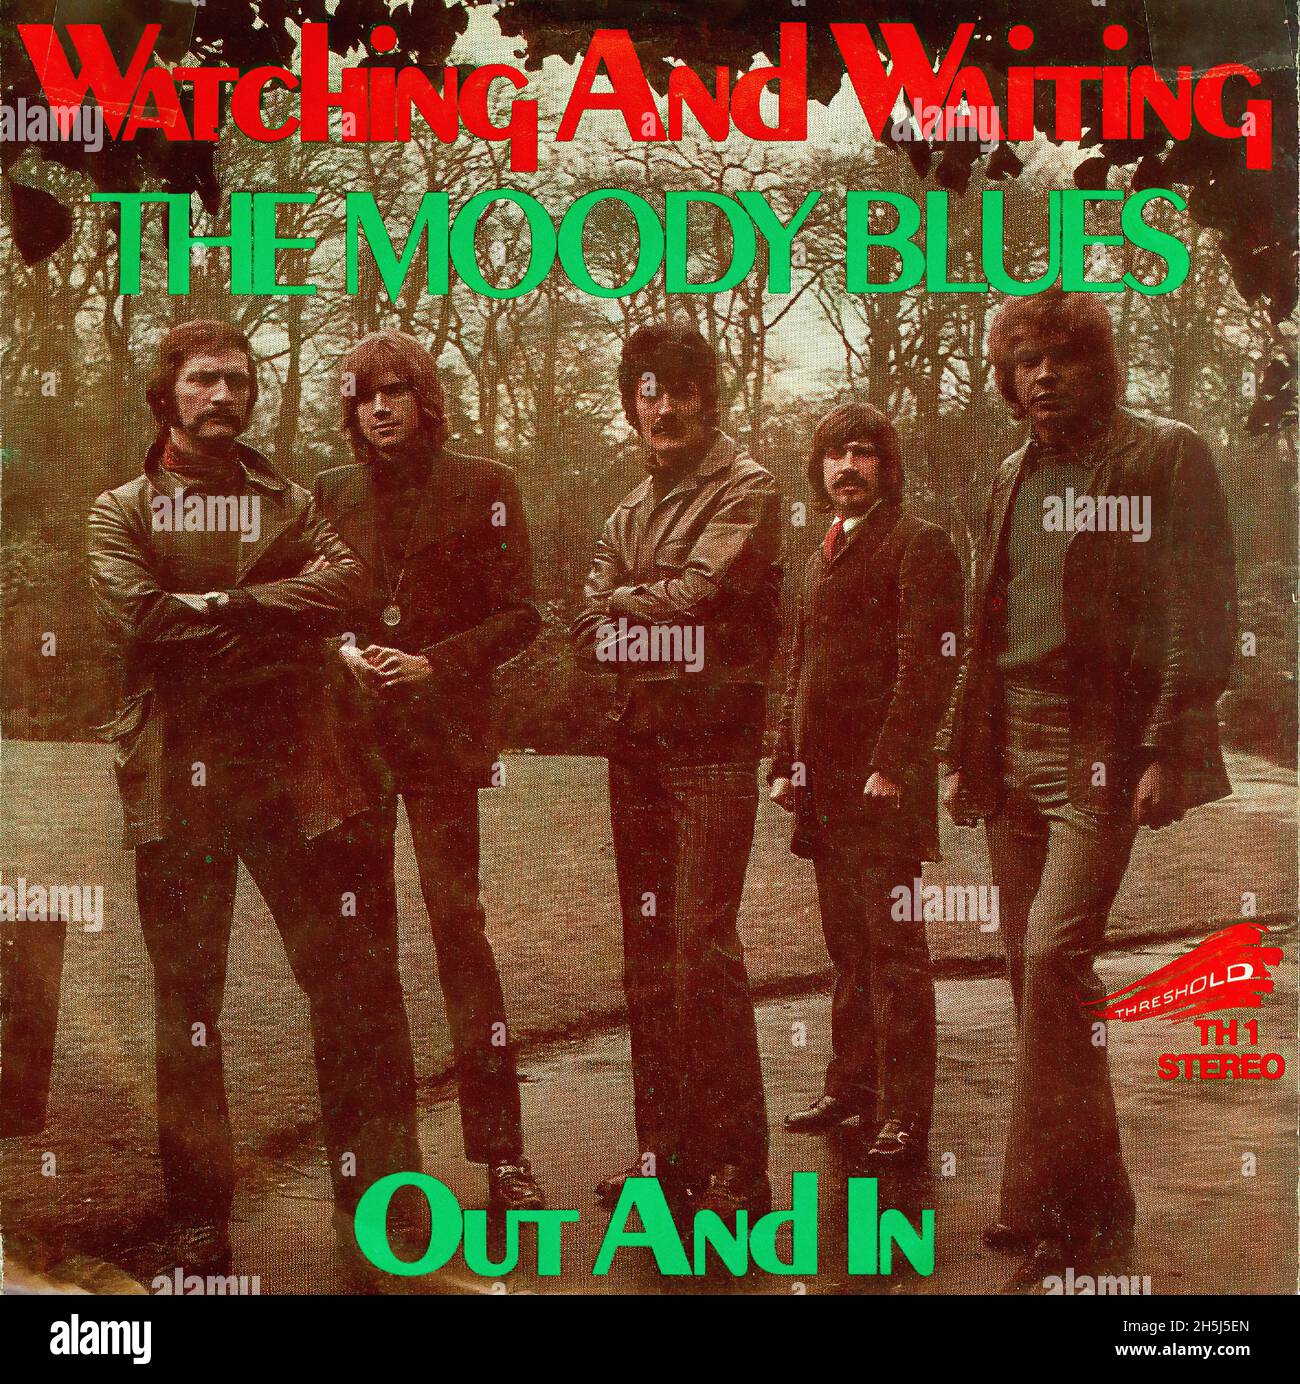 Copertina singola vintage - Moody Blues, The - Watching and Waiting - D - 1969 Foto Stock